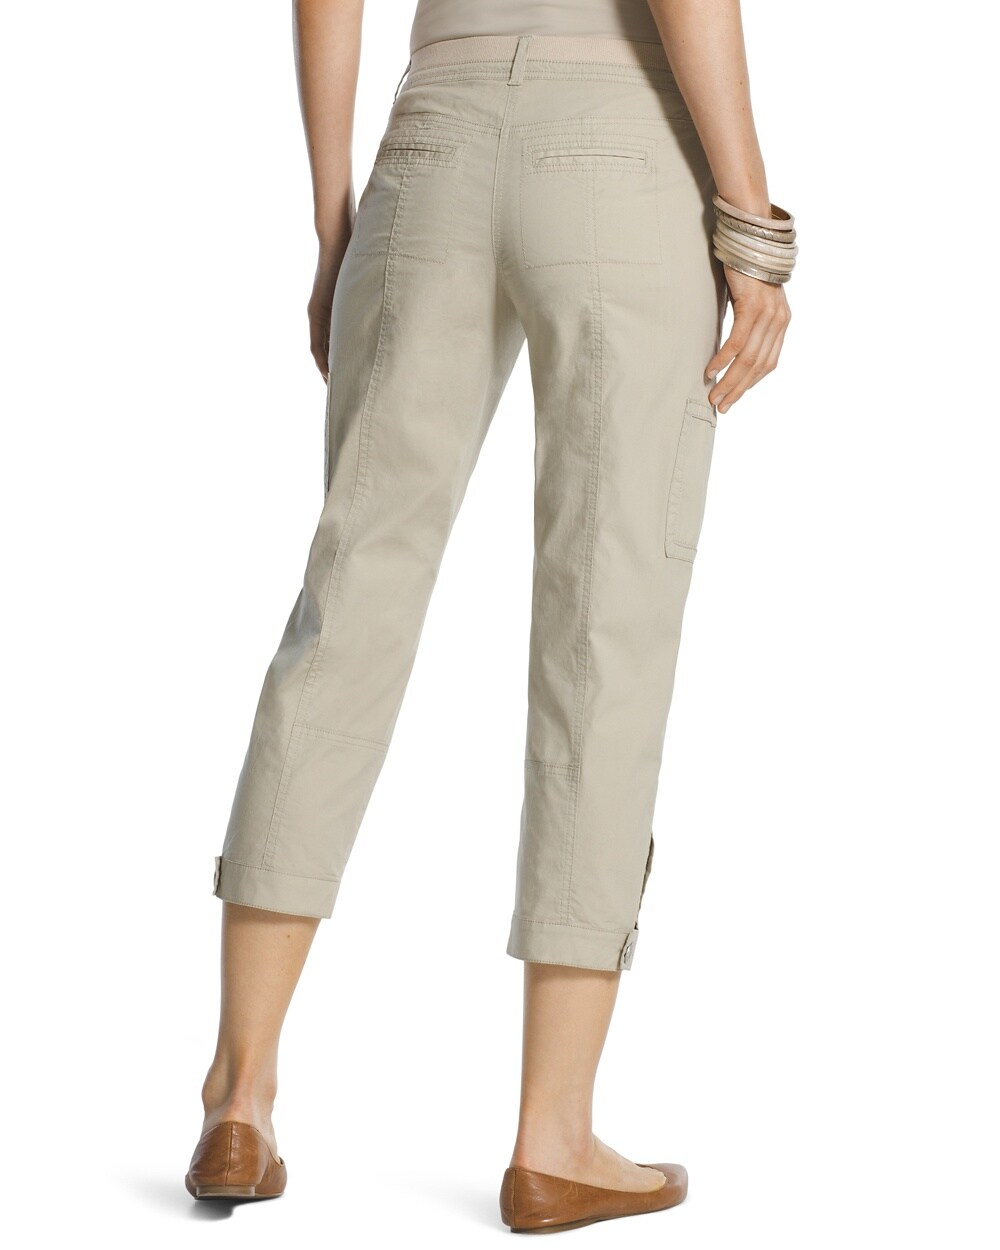 Casual Button-Cuff Crop Pants - Chico's